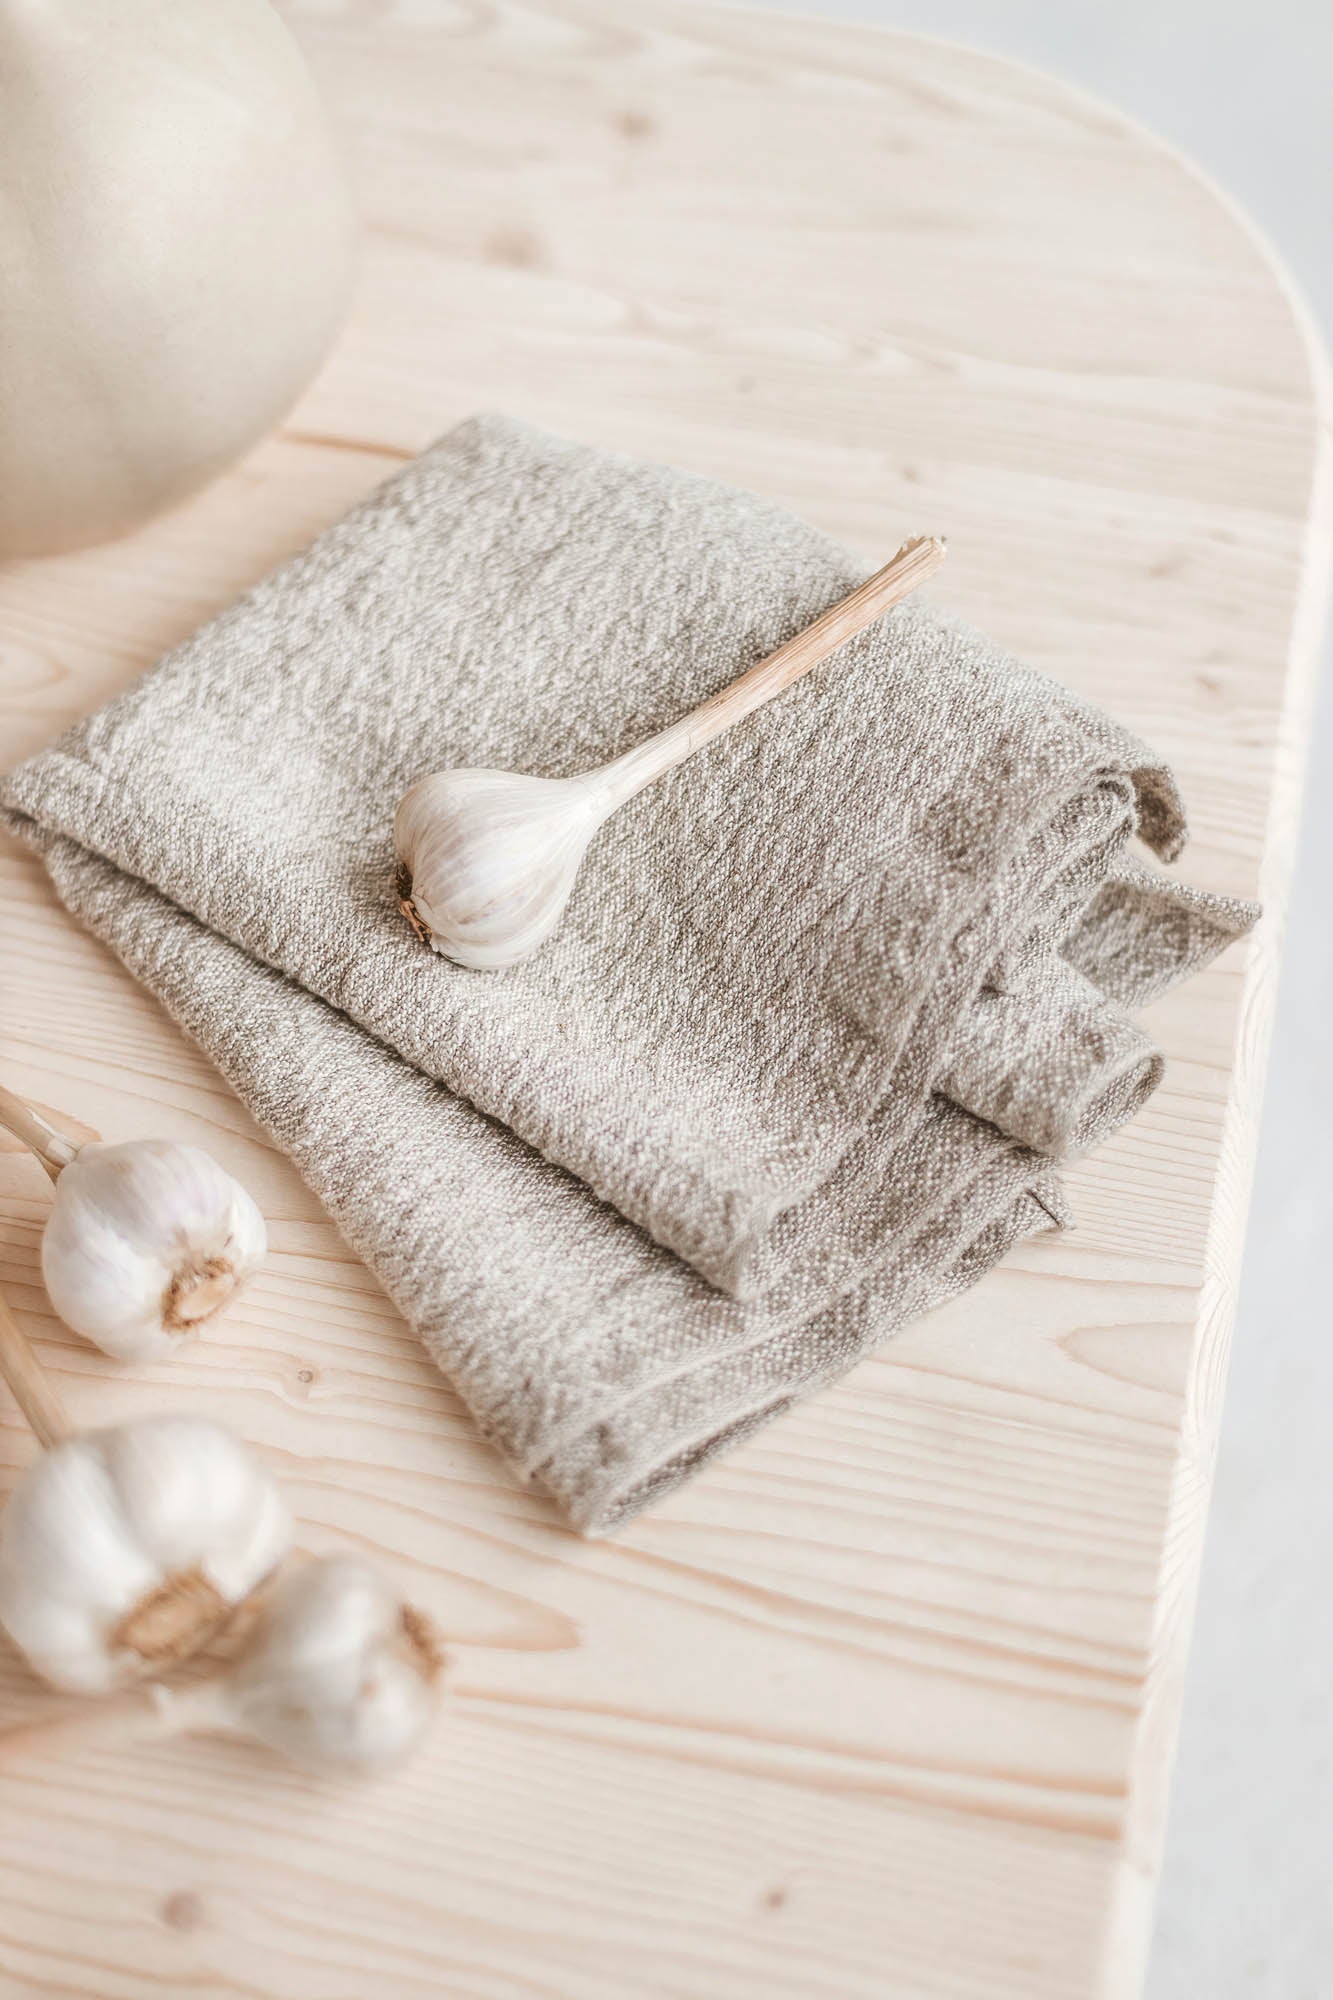 Thick linen towels in natural color - set of 2